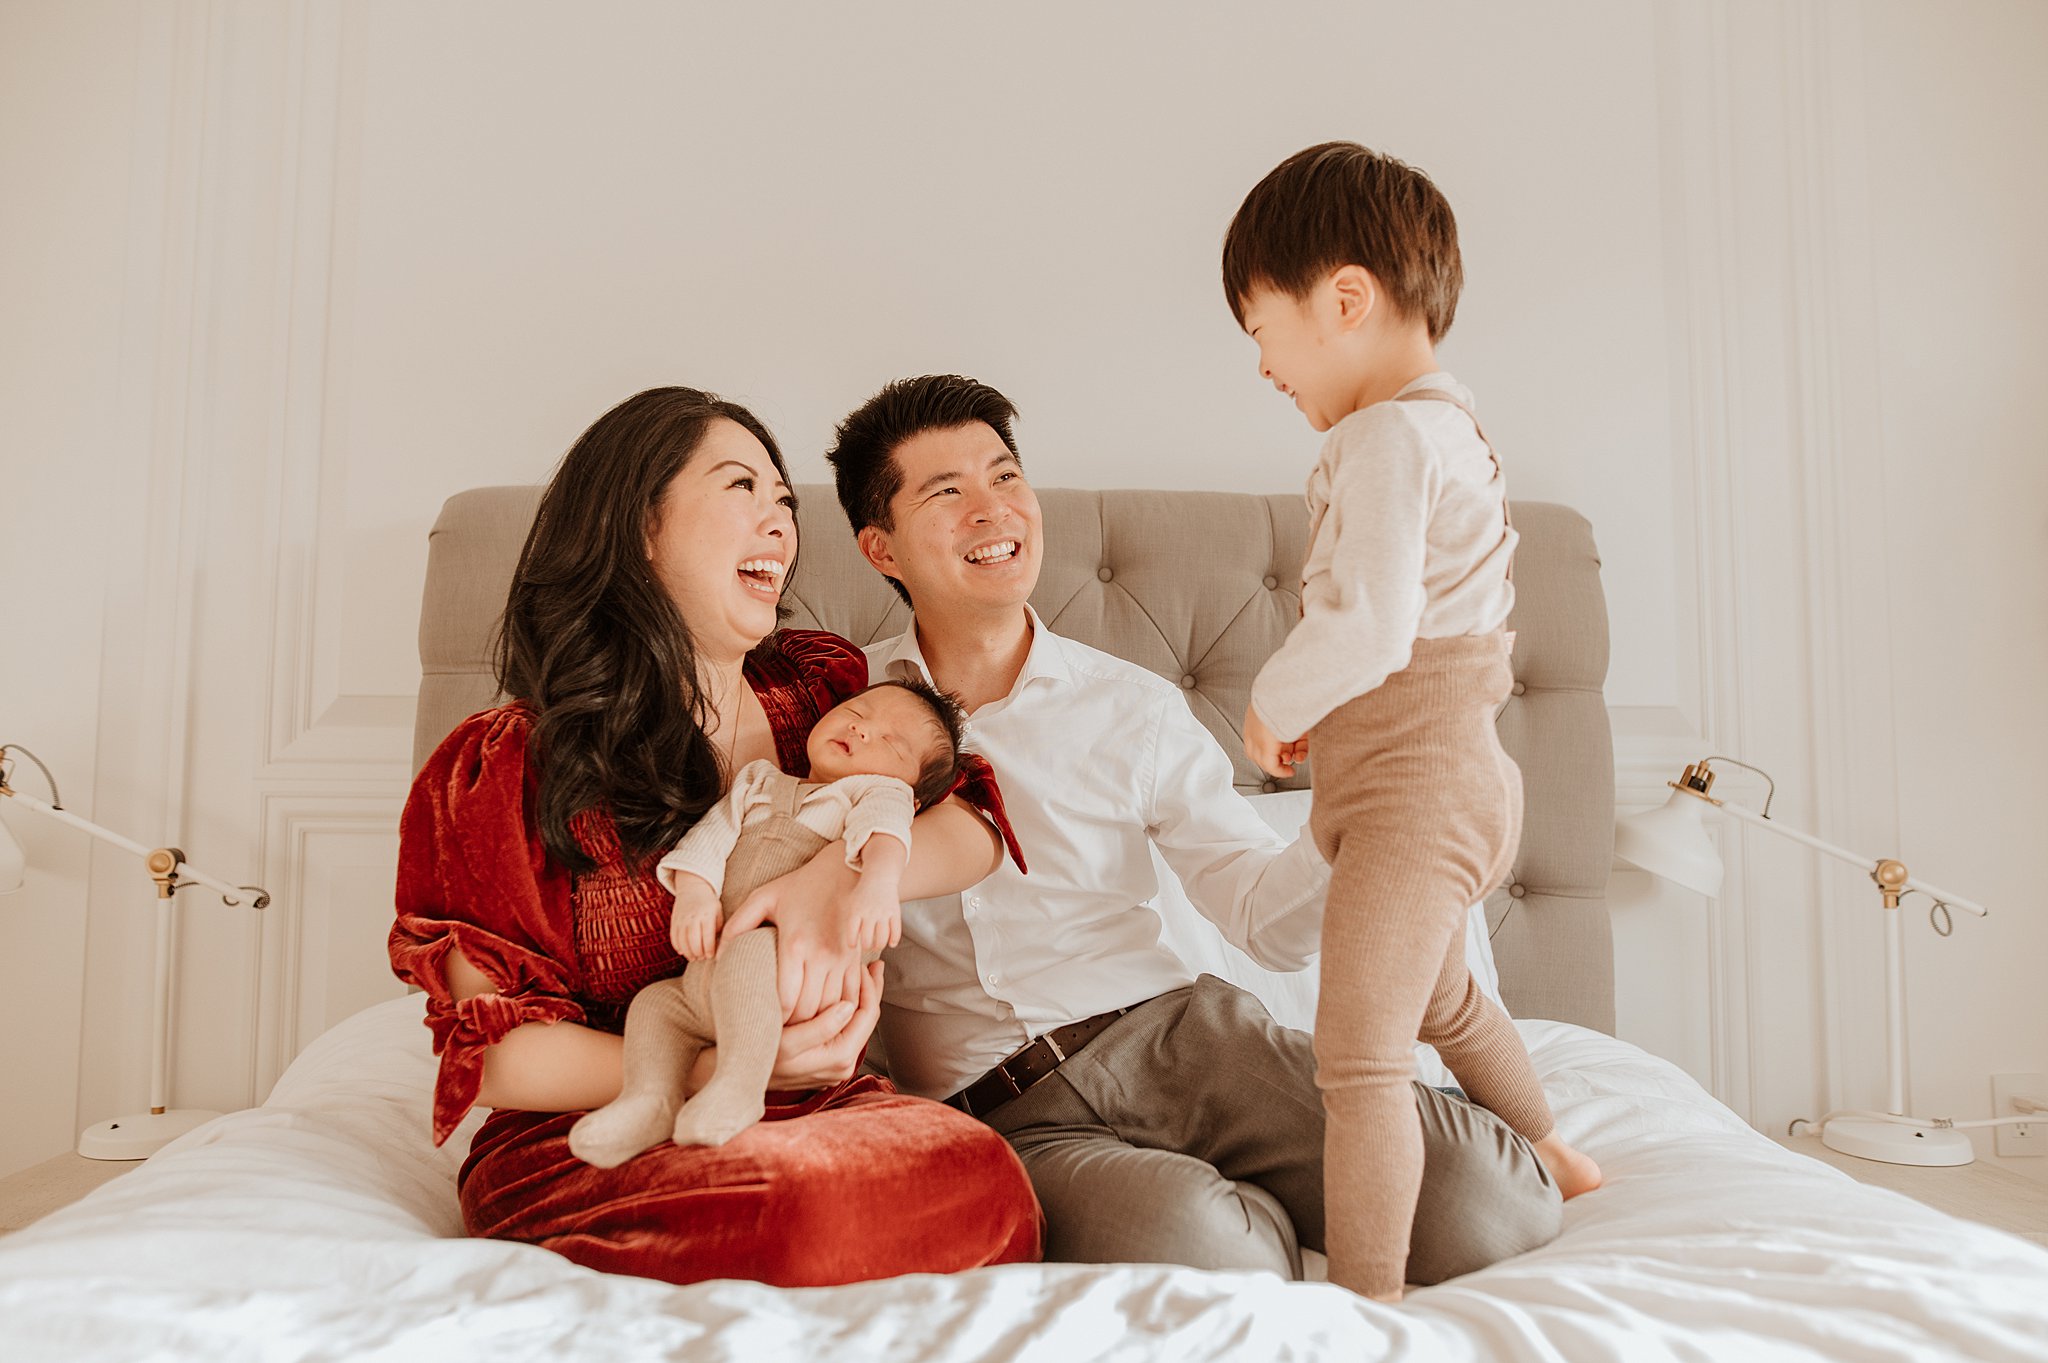 A mom and dad sit on a bed holding their sleeping newborn baby and playing with their toddler son thanks to vancouver prenatal massage